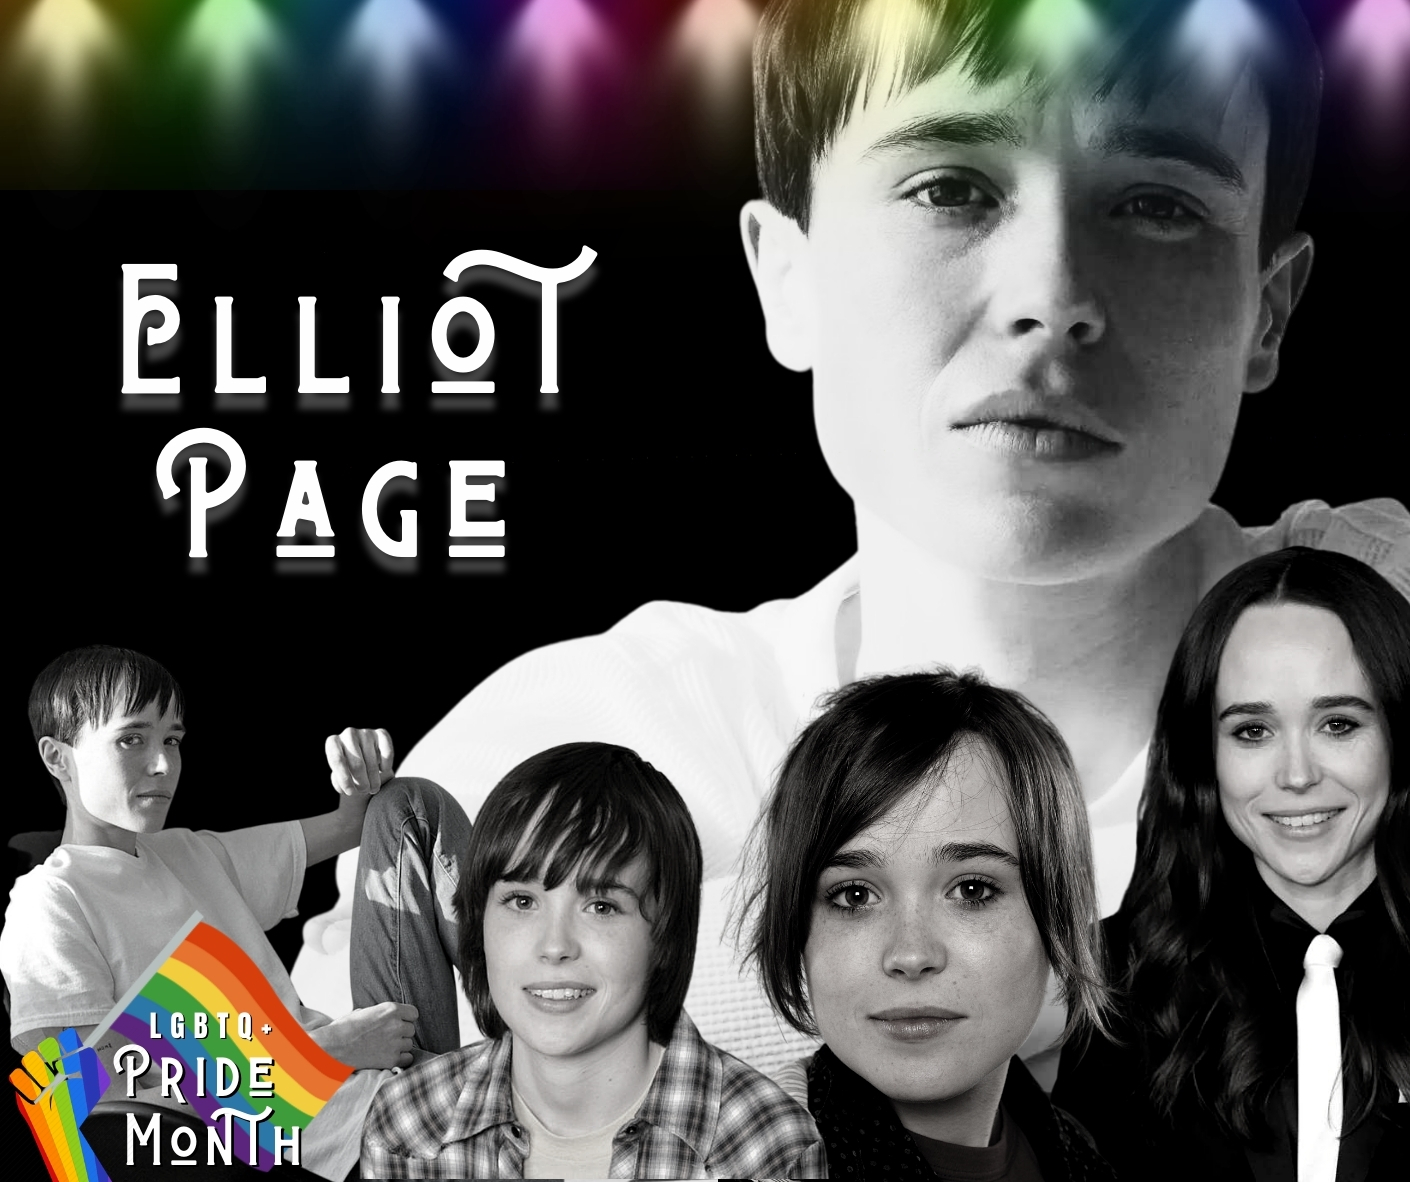 You are currently viewing Canadian Actor and Producer Powerhouse Elliot Page Sets New Standards for Hollywood by Simply Being His Authentic Self